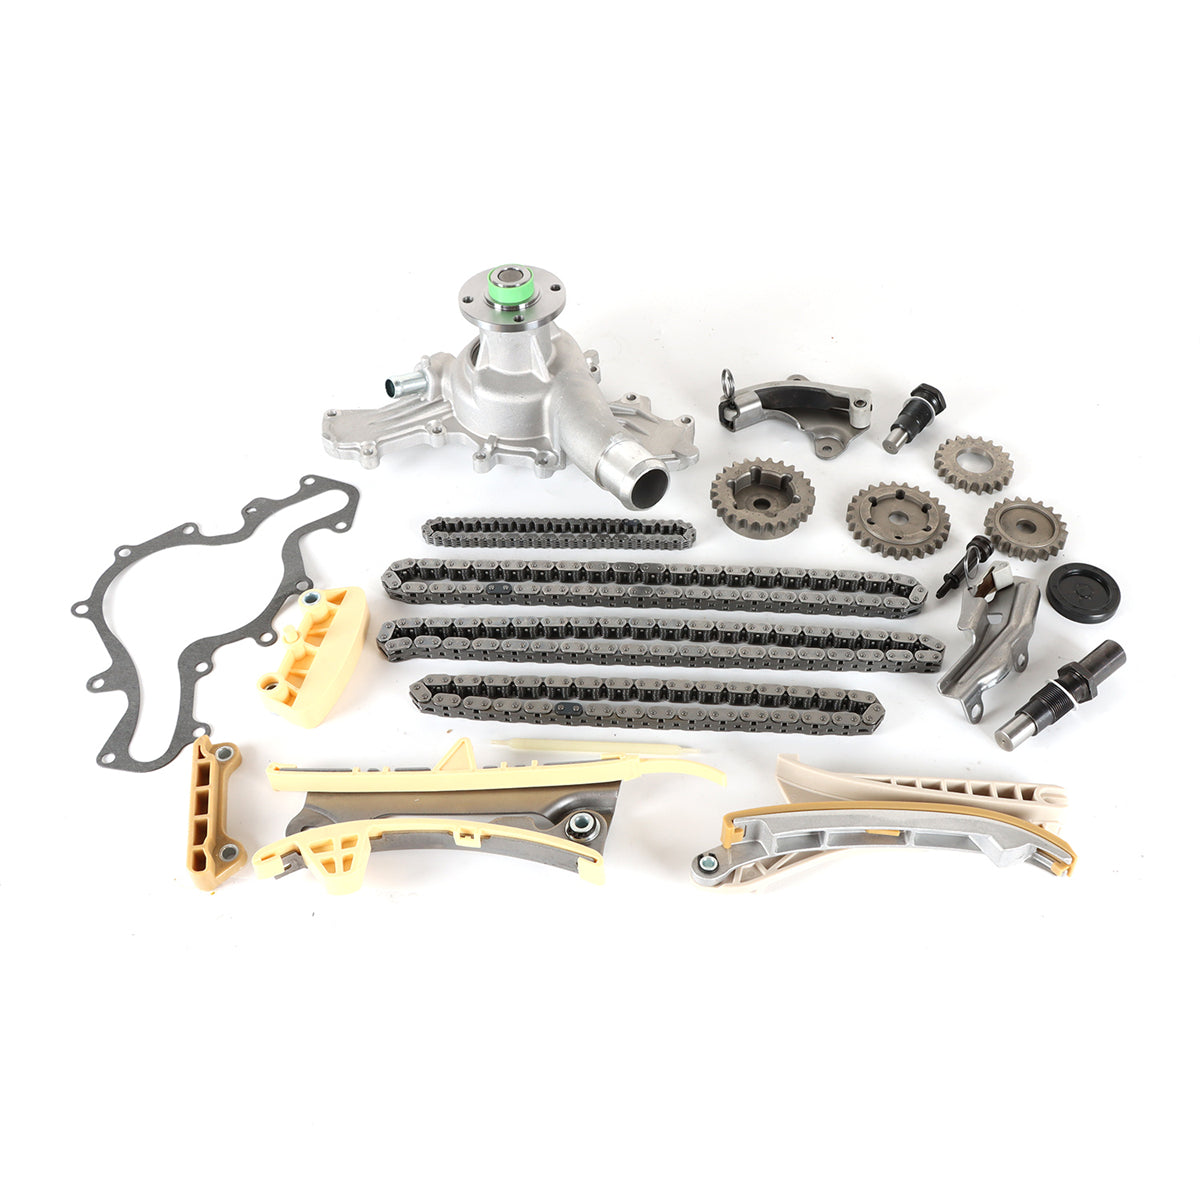 Daysyore Timing Chain Kit,Timing Chain Kit  for 1997 to 2009, Timing Chain Kit Ford Explorer/Mustang/Ranger, Auto Timing Chain Kit 